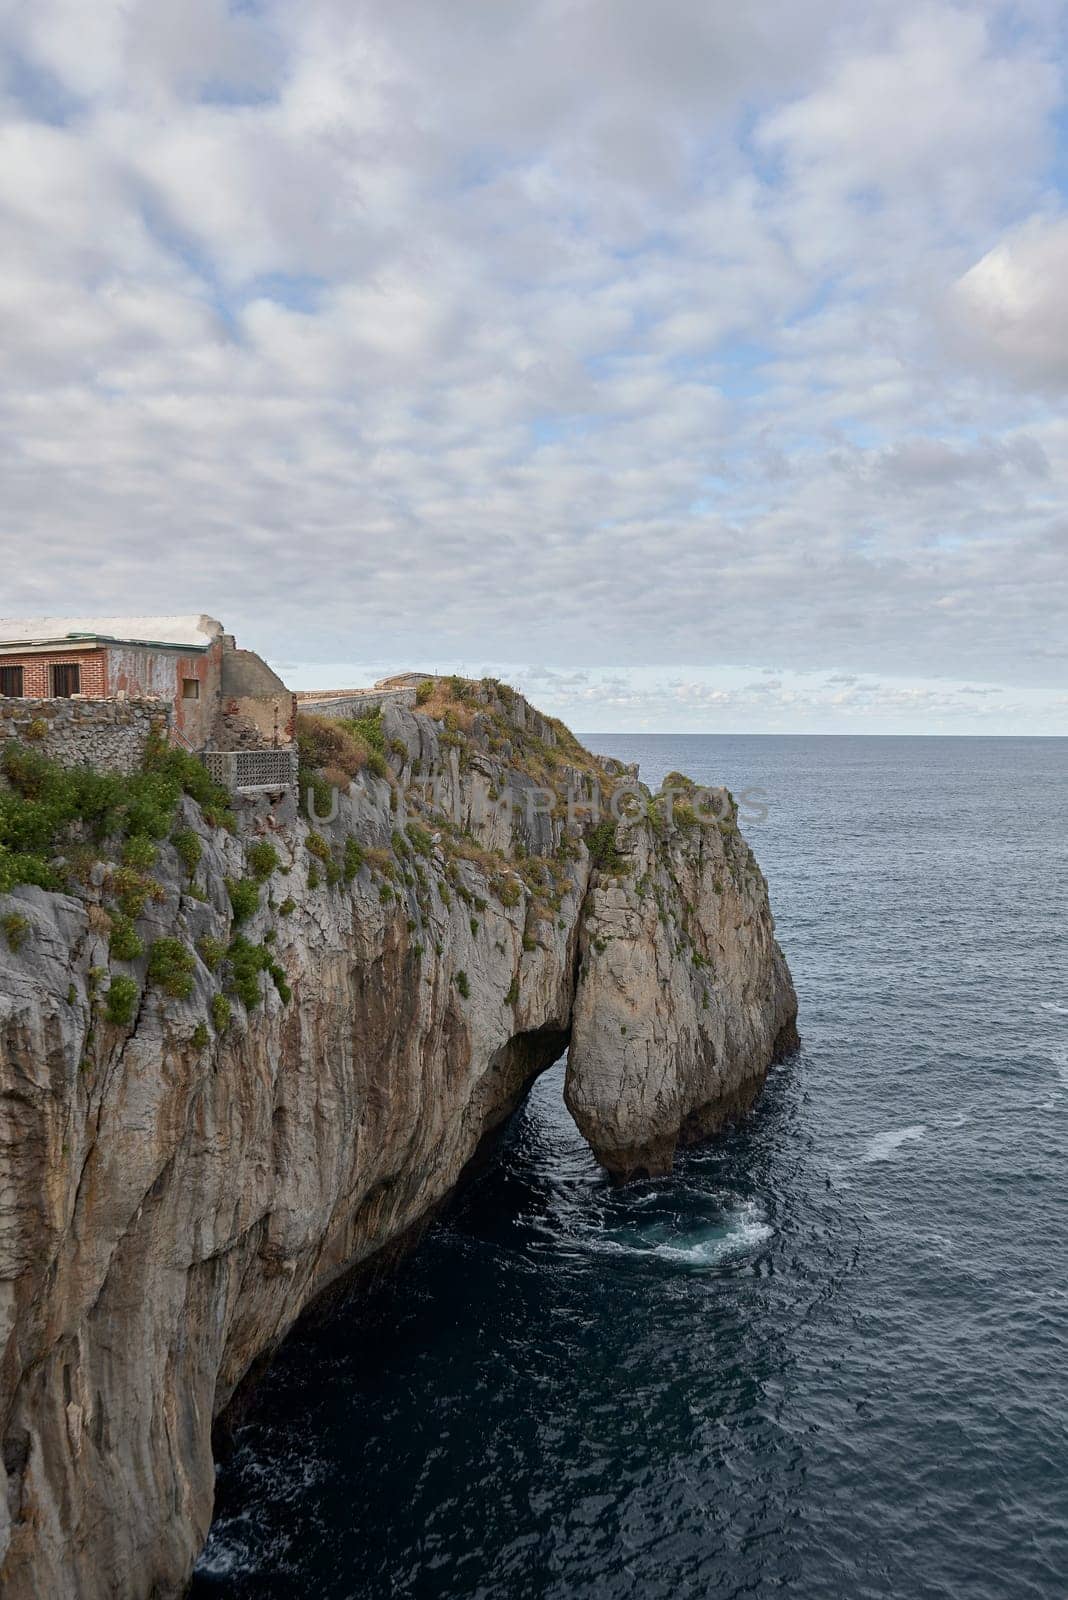 Cliffs on the coast of Castro Urdiales, Spain. Height, calm sea, waves, moving clouds, hole, arc, stone buildings etc